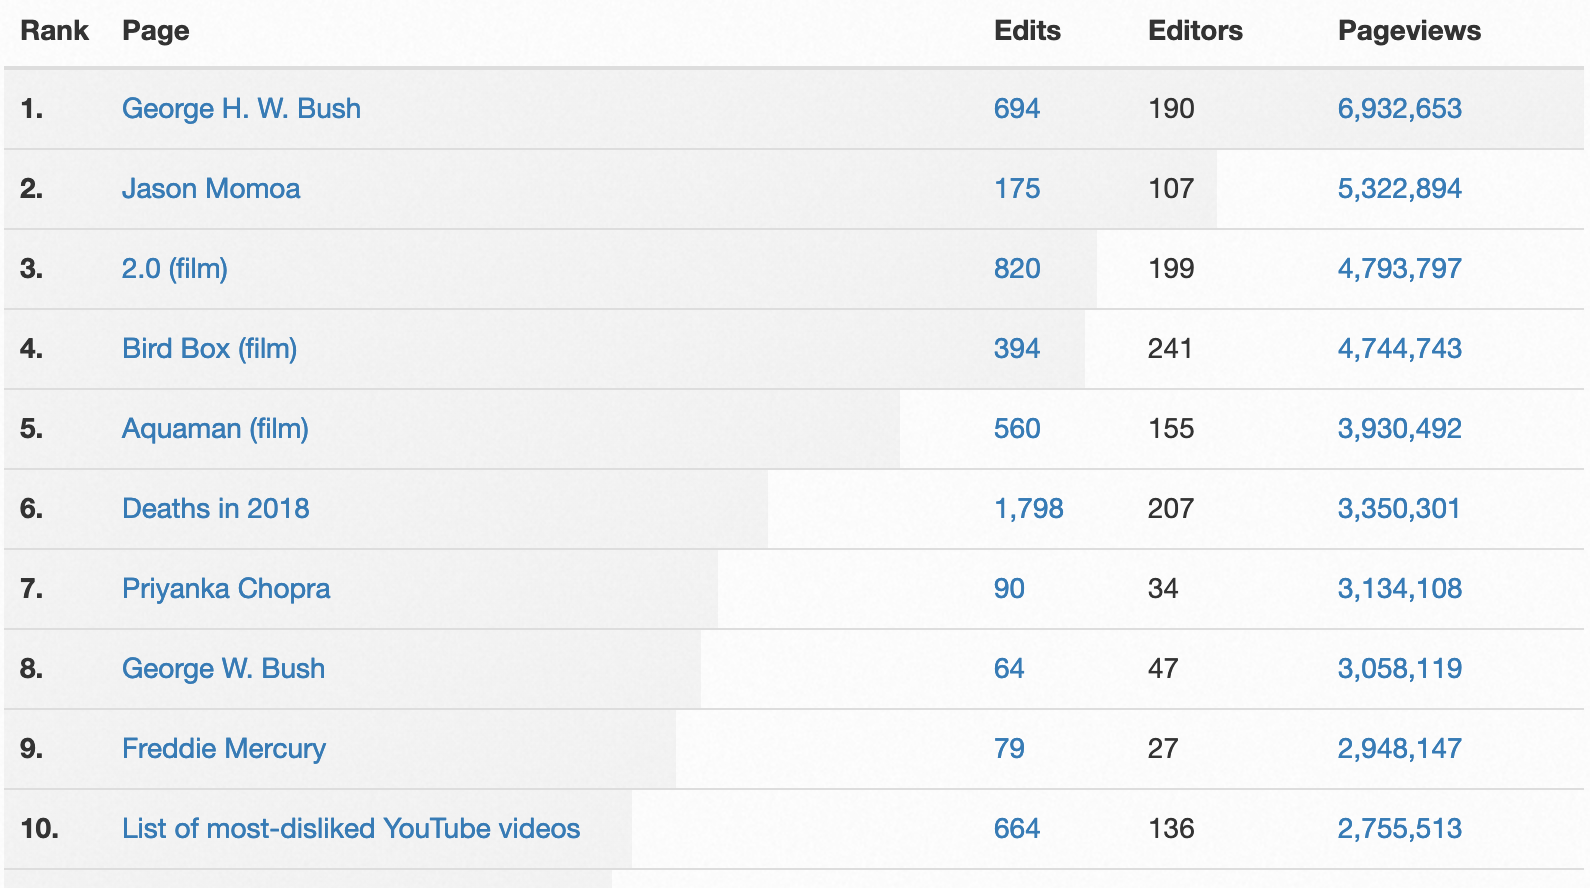 Top 10 most viewed articles from the Topviews Analysis tool